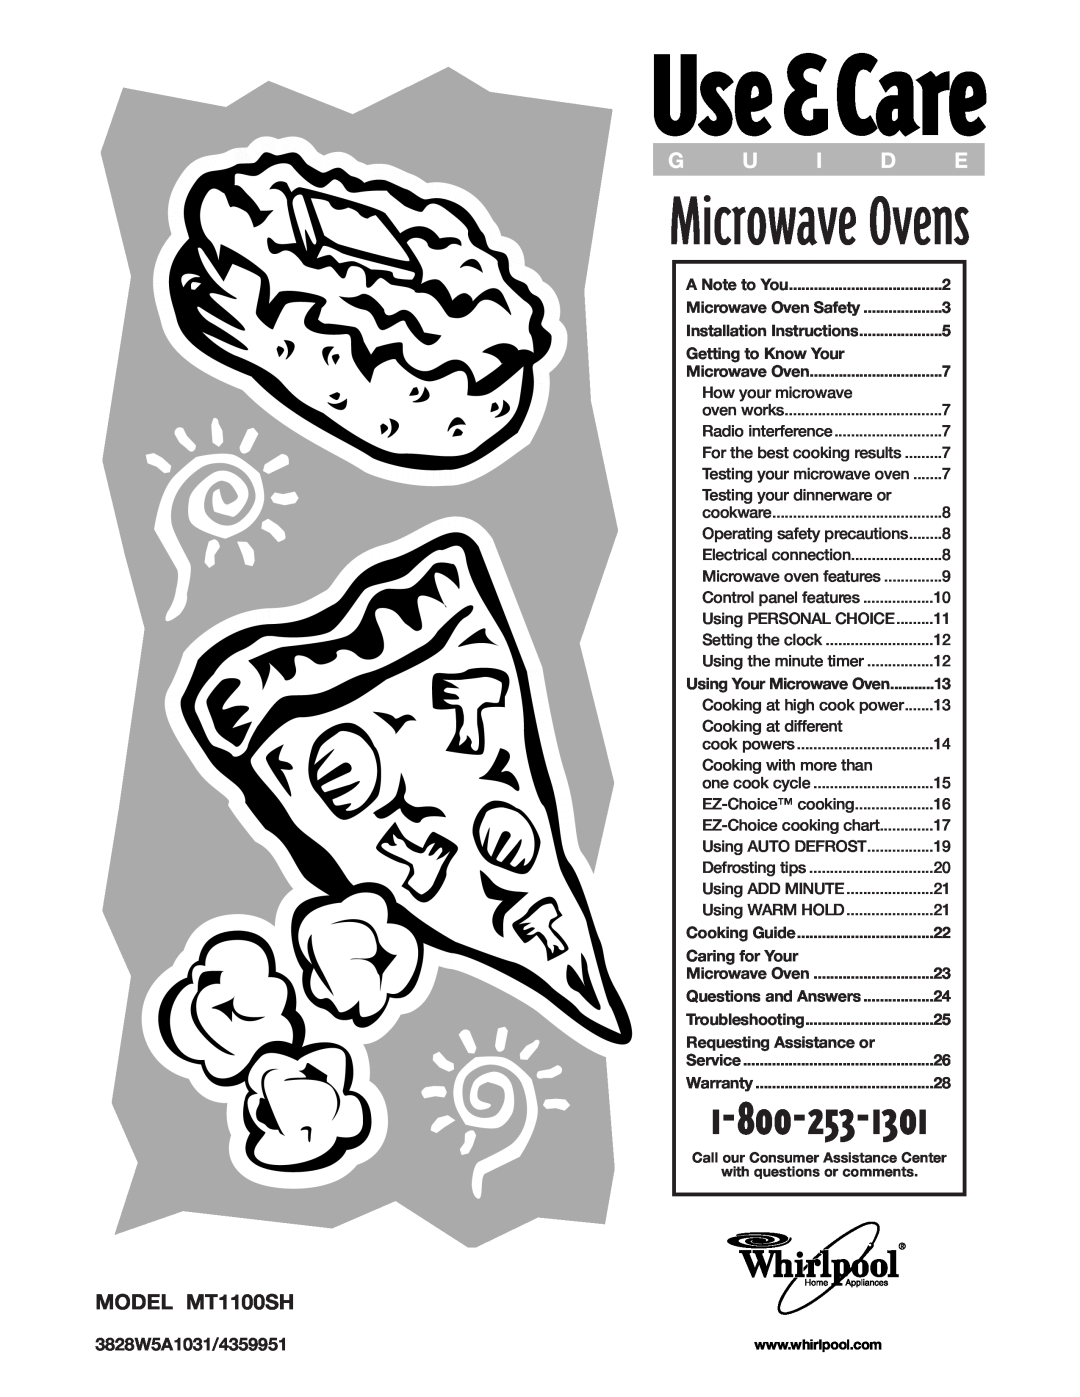 Whirlpool installation instructions MODEL MT1100SH, Microwave Ovens, A Note to You, Getting to Know Your, Cooking Guide 